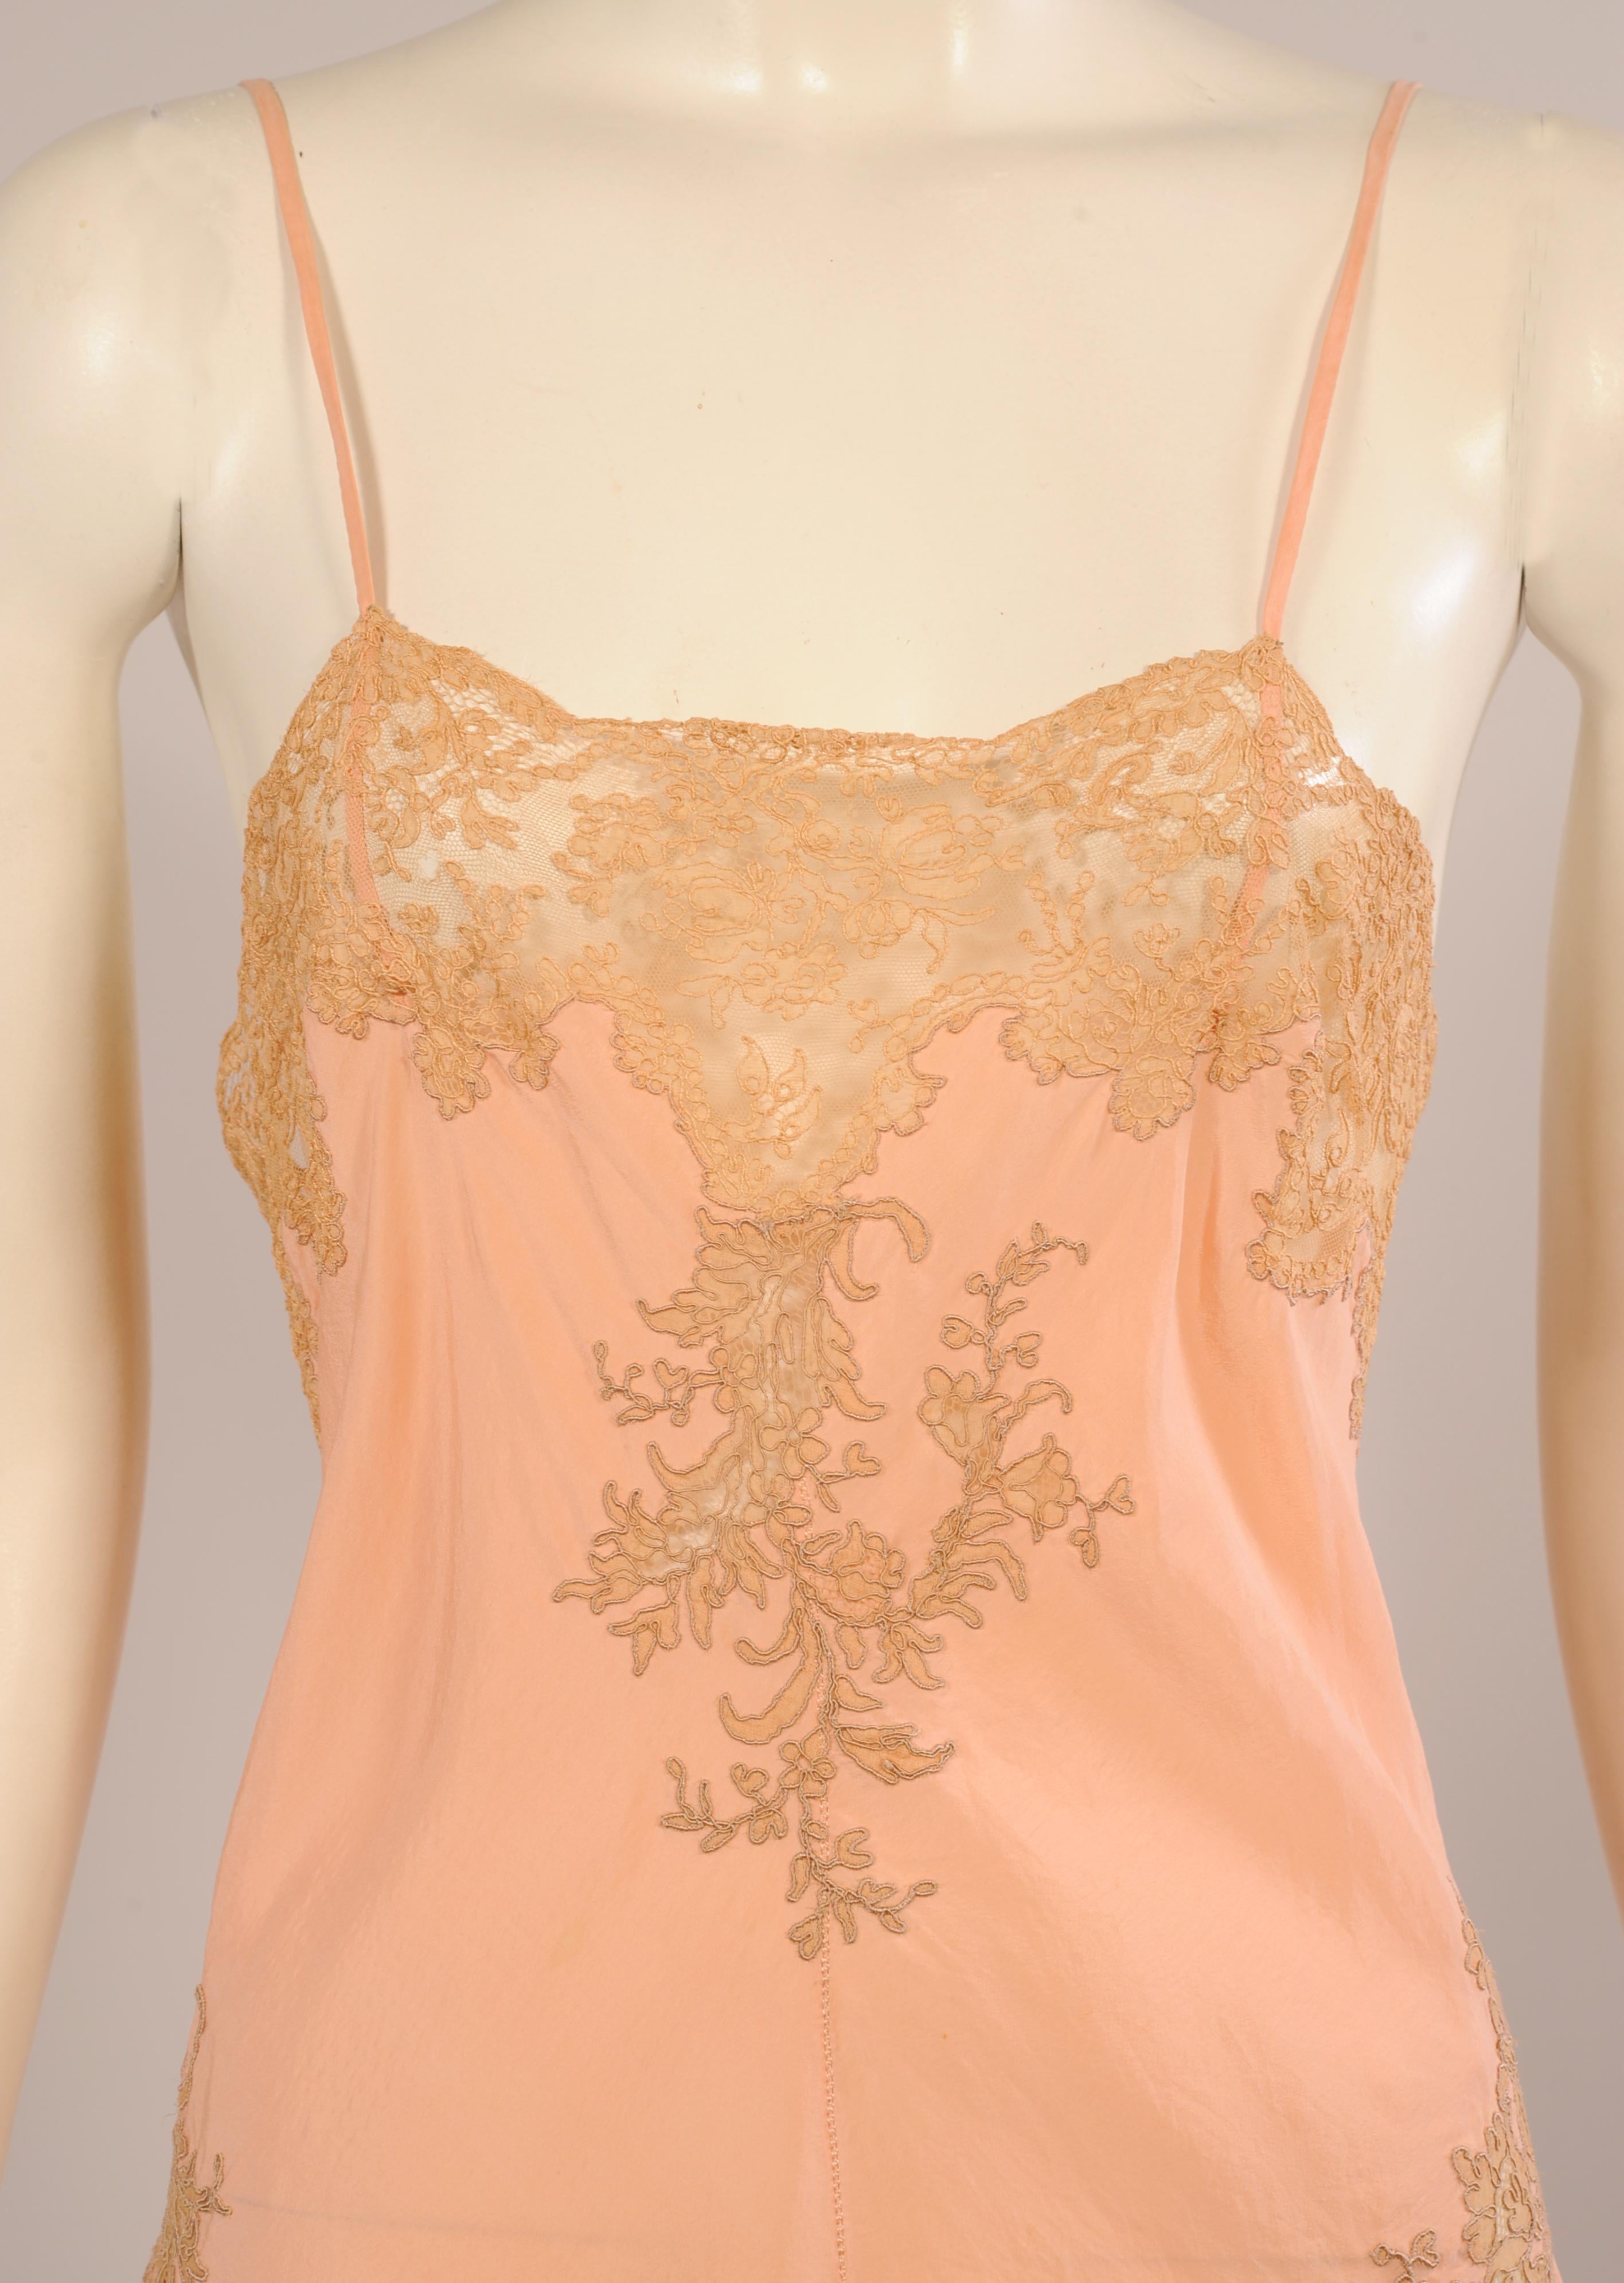 Handmade Alencon lace is lavished on this beautiful completely handmade lingerie pink silk slip. There are narrow straps above a wide band of lace at the top with a beautiful lace applique at the center and over both hips. A deep flounce of double